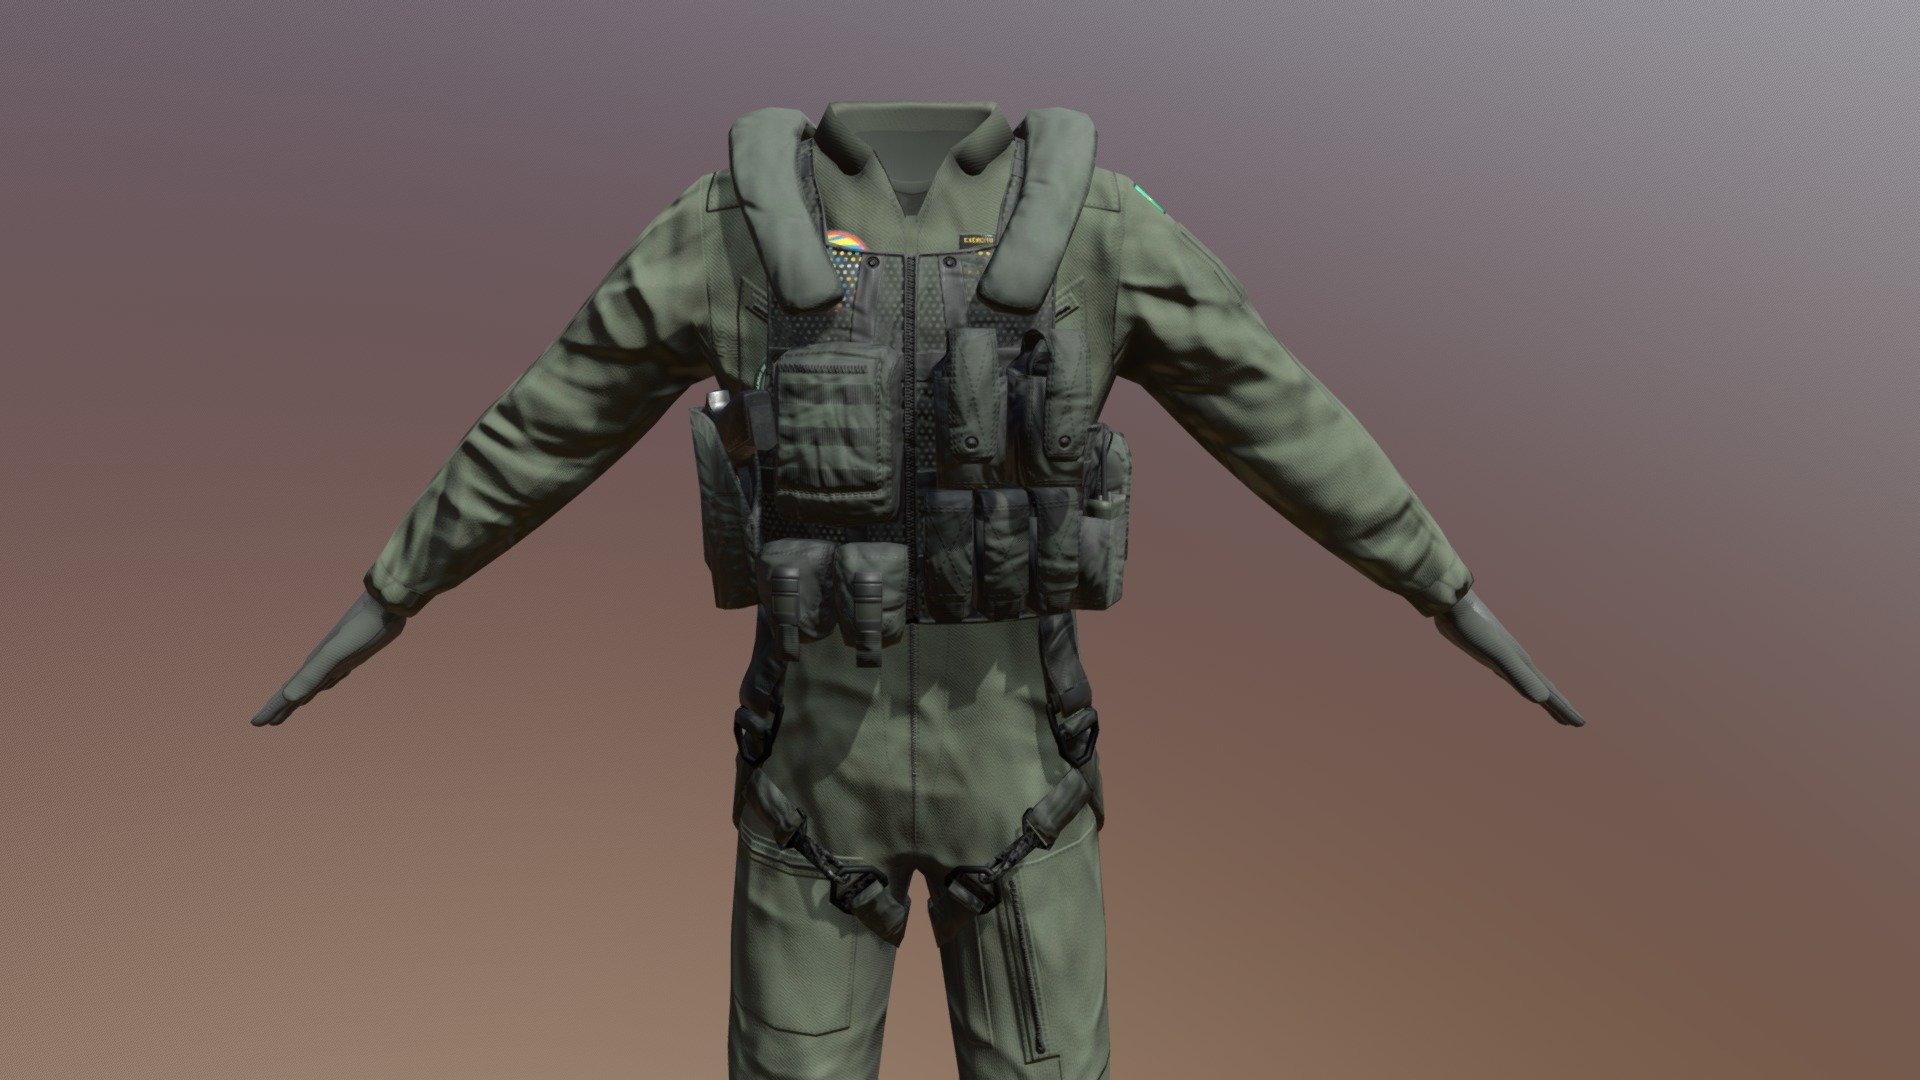 3D model made with blender and texturized using Substance Painter.
Game model made for my Arma 3 MOD pack Brazilian Armed Forces 3d model